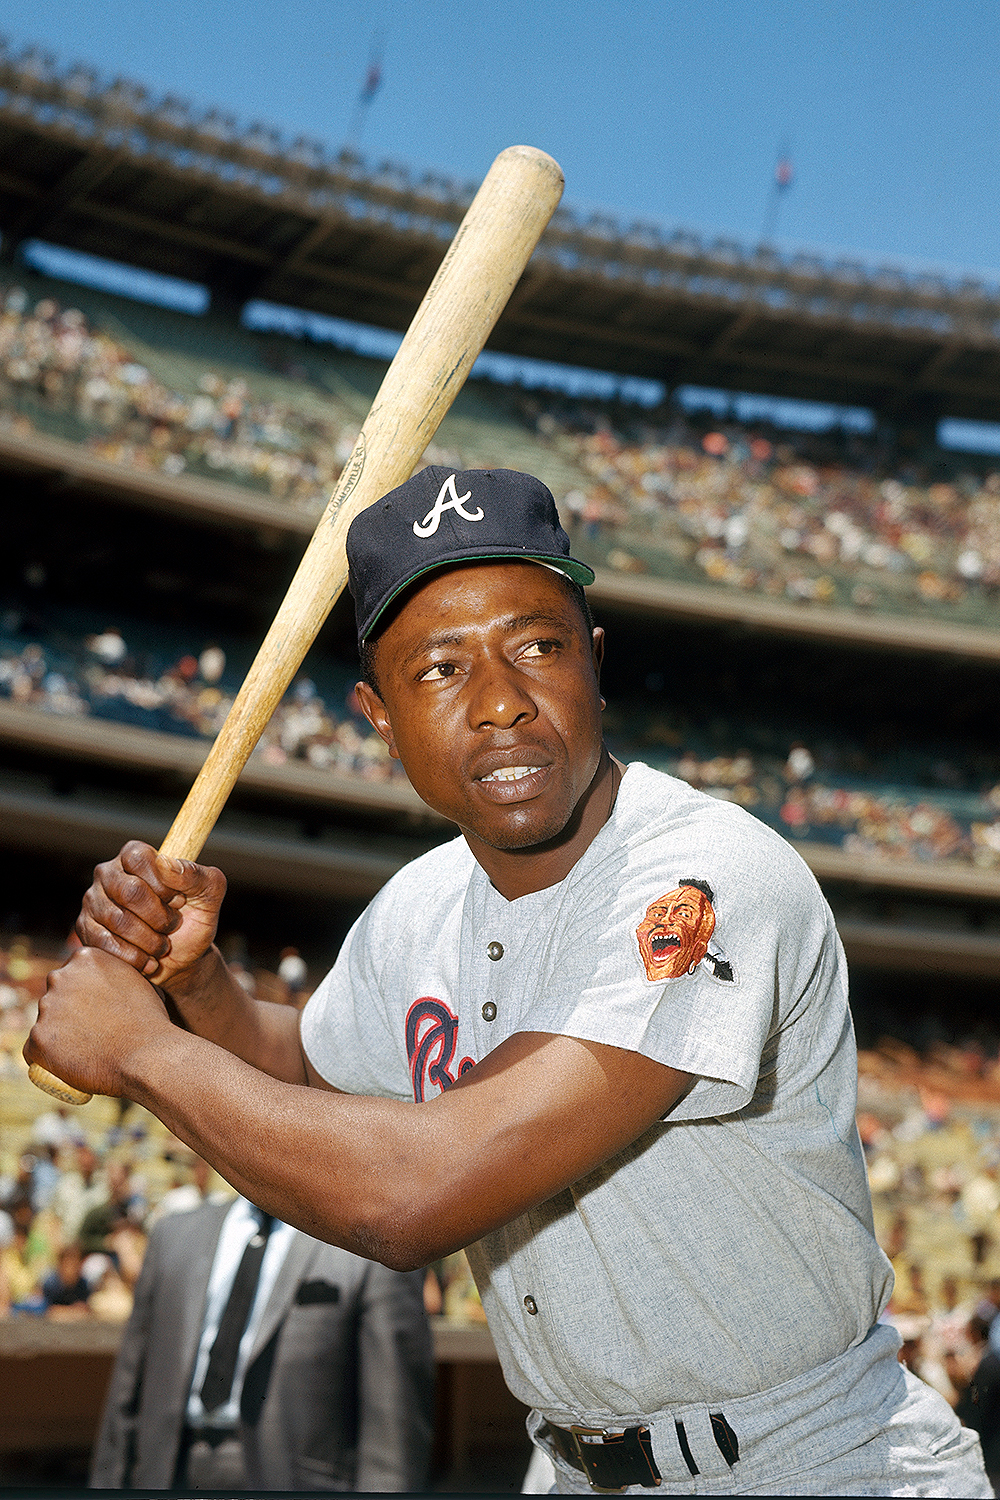 UNDATED:  Hank Aaron of the Atlanta Braves poses for an action portrait circa 1968.  Hank Aaron played for the Atlanta Braves from 1954 to 1954.   (Photo by Louis Requena/MLB via Getty Images)